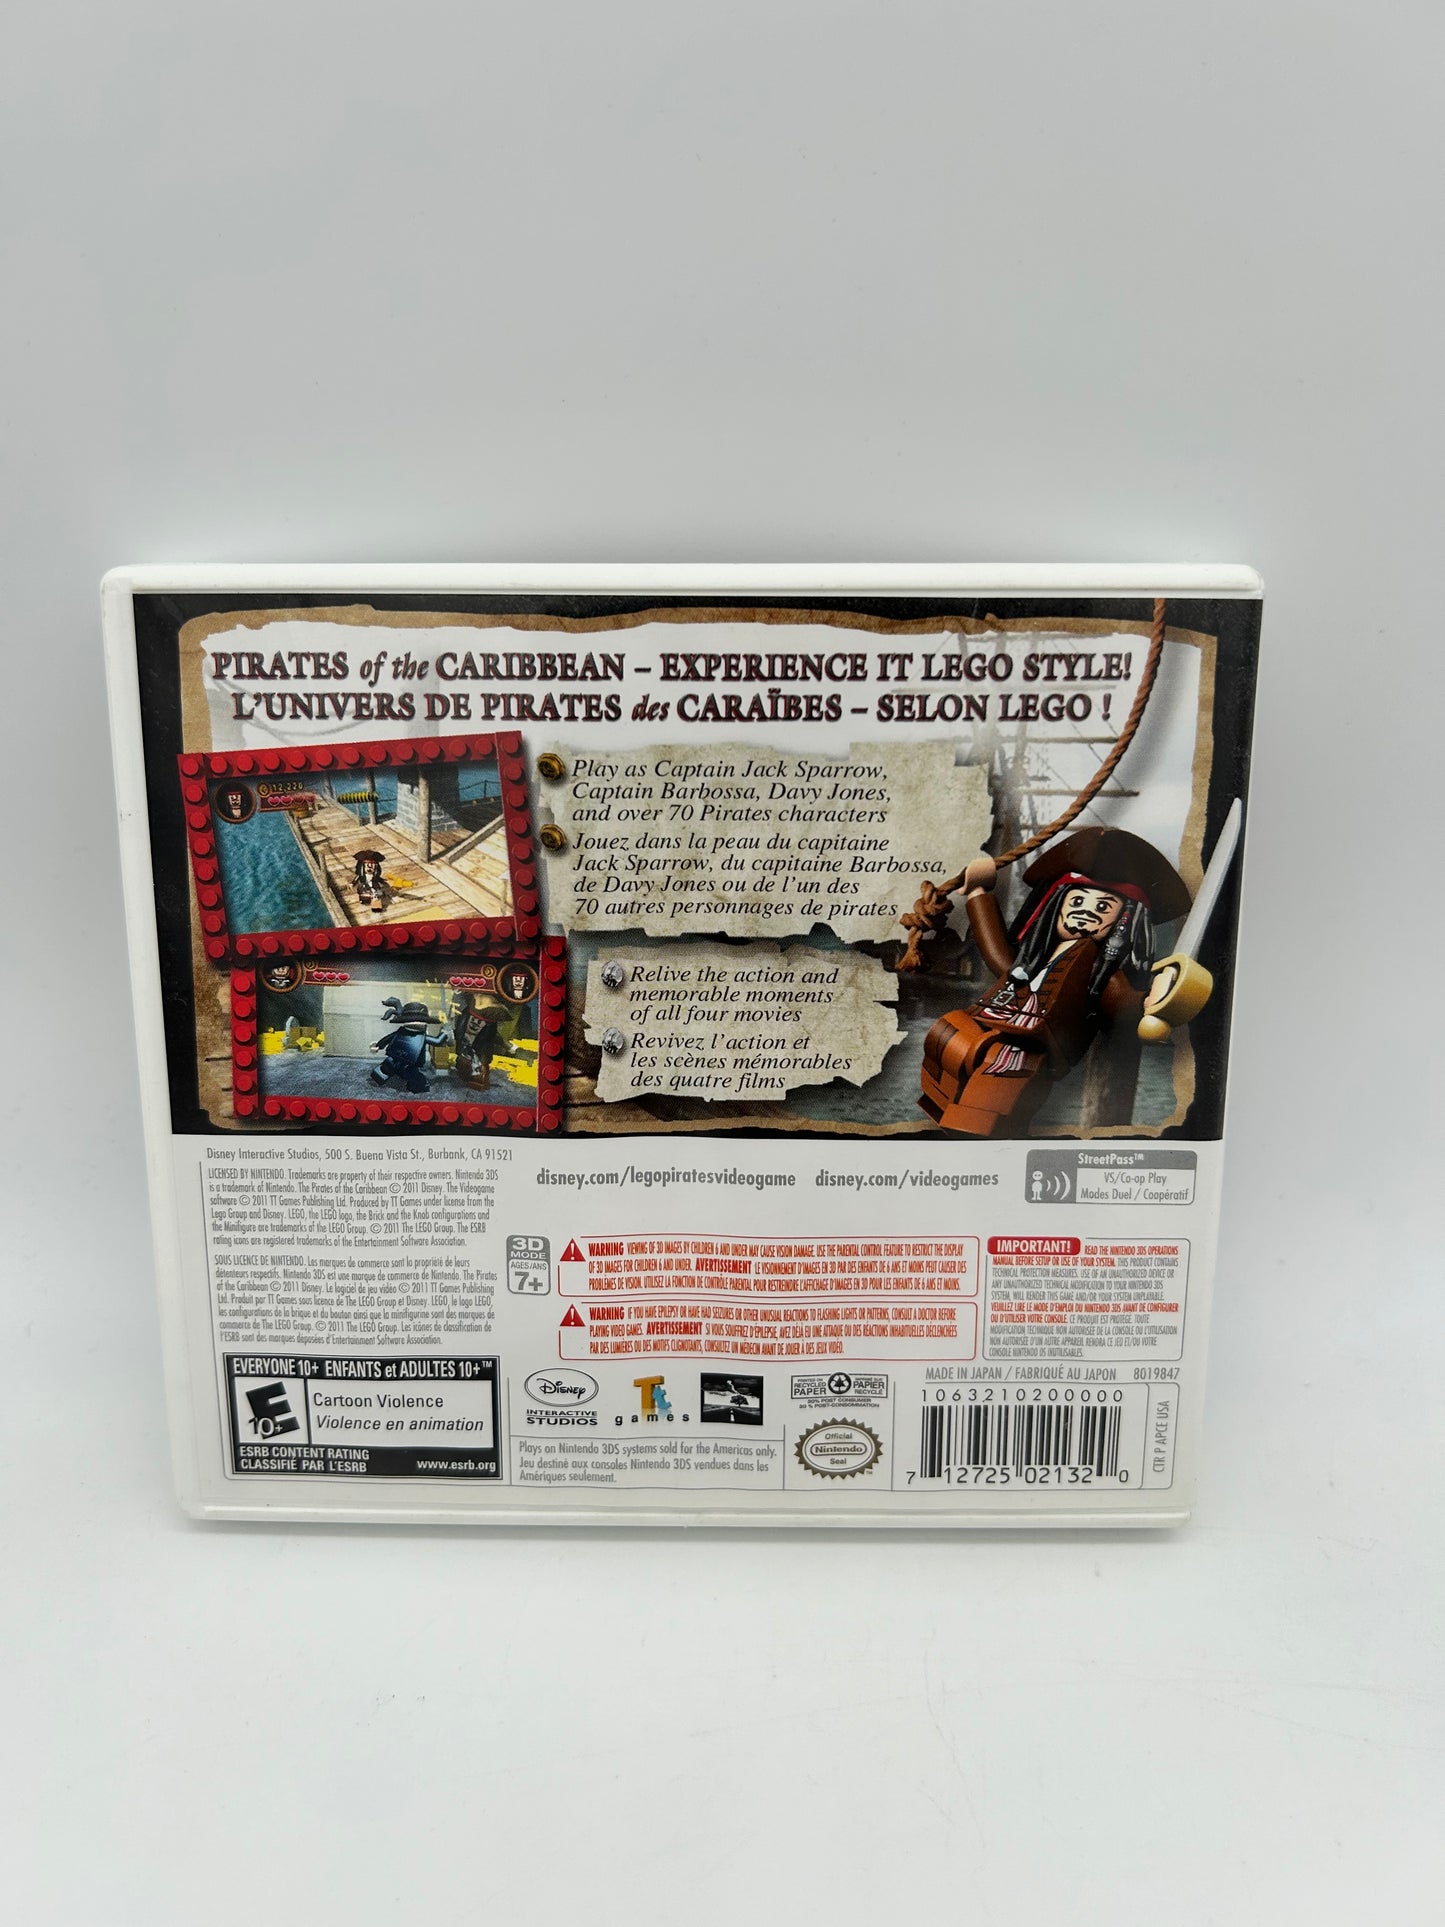 NiNTENDO 3DS | LEGO PiRATES OF THE CARiBBEAN THE ViDEO GAME